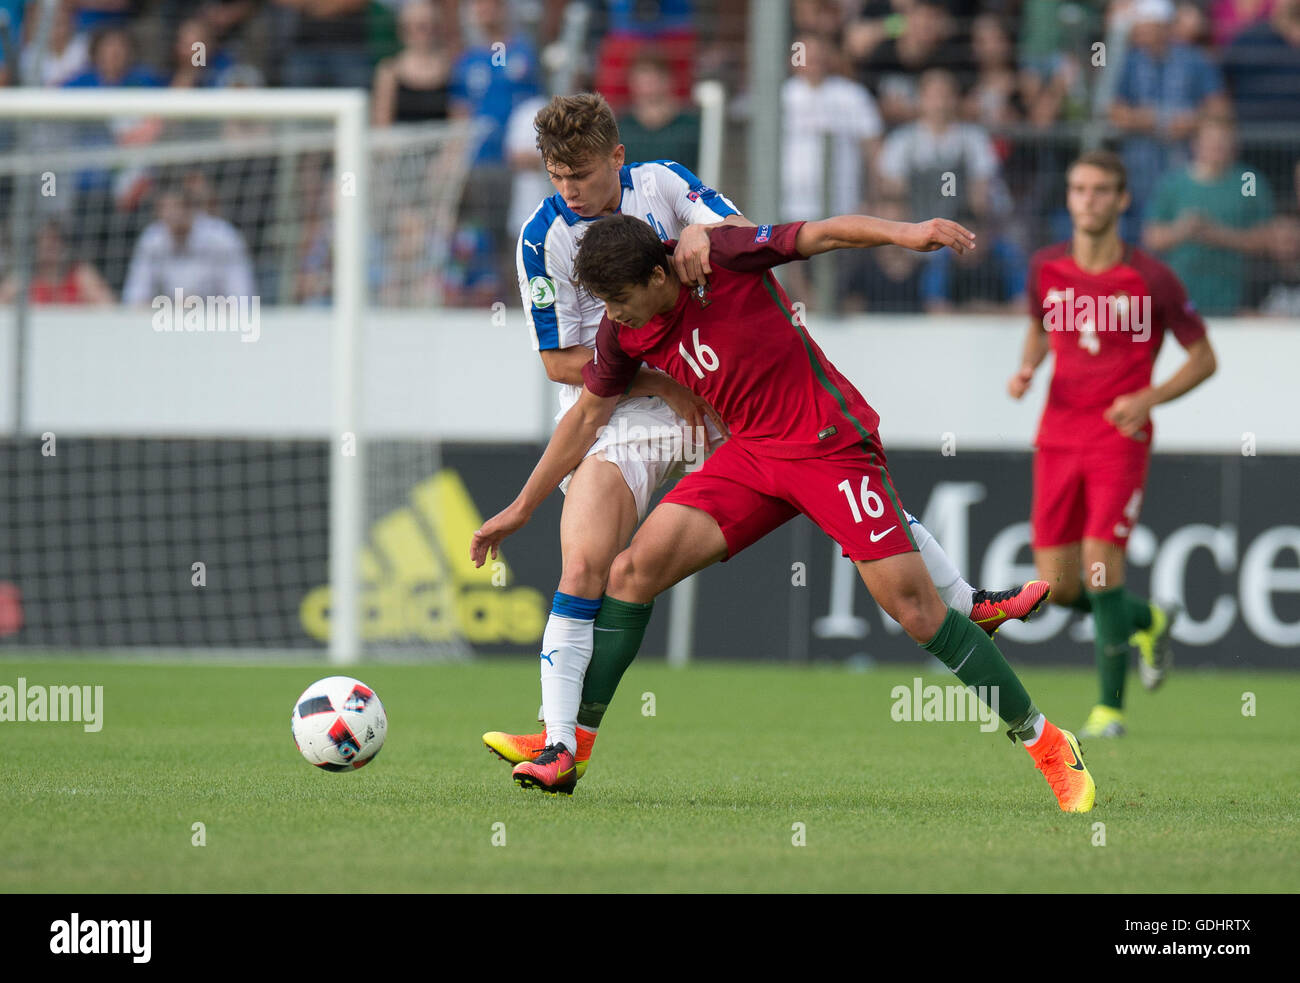 Stuttgart, Germany. 17th July, 2016. Italy's Nicolo Barella (L) and Portugal's Bruno Xadas vie for the ball during the U19 European Chamionship soccer match between Italy and Portugal in the Gazi-Stadion auf der Waldau in Stuttgart, Germany, 17 July 2016. Photo: DENIZ CALAGAN/dpa/Alamy Live News Stock Photo